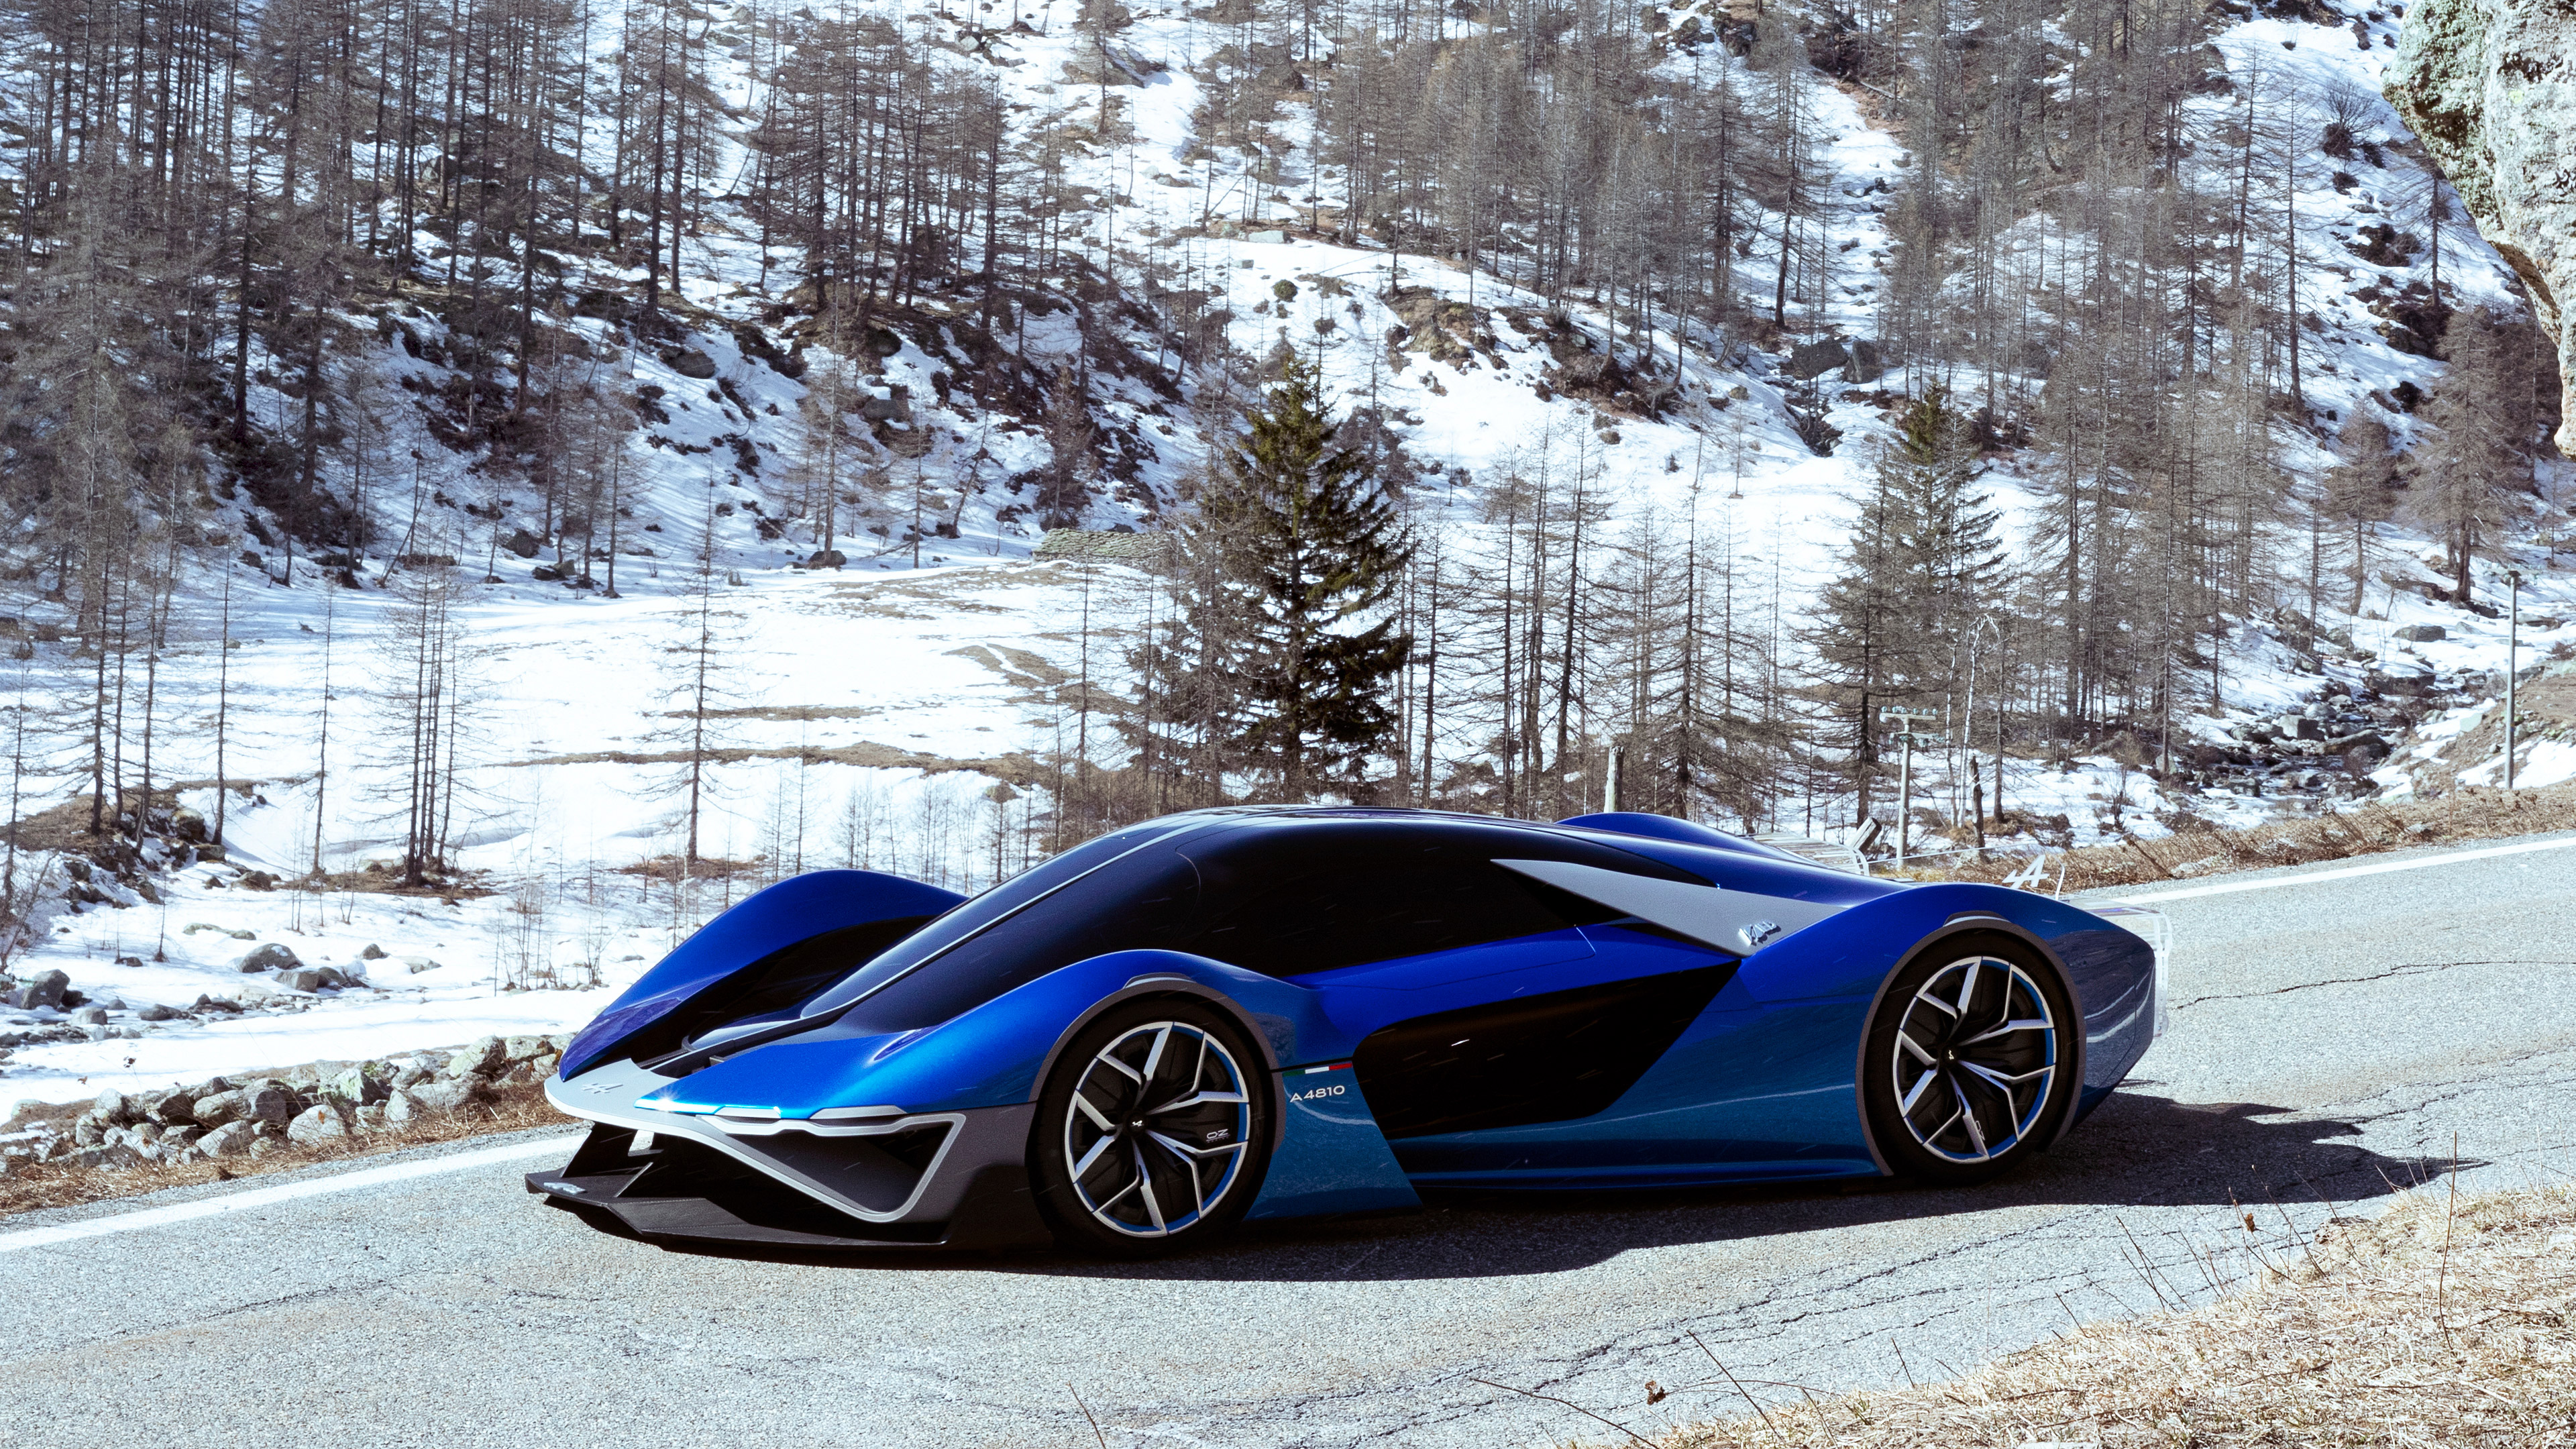  2022 Alpine A4810 by IED Concept Wallpaper.